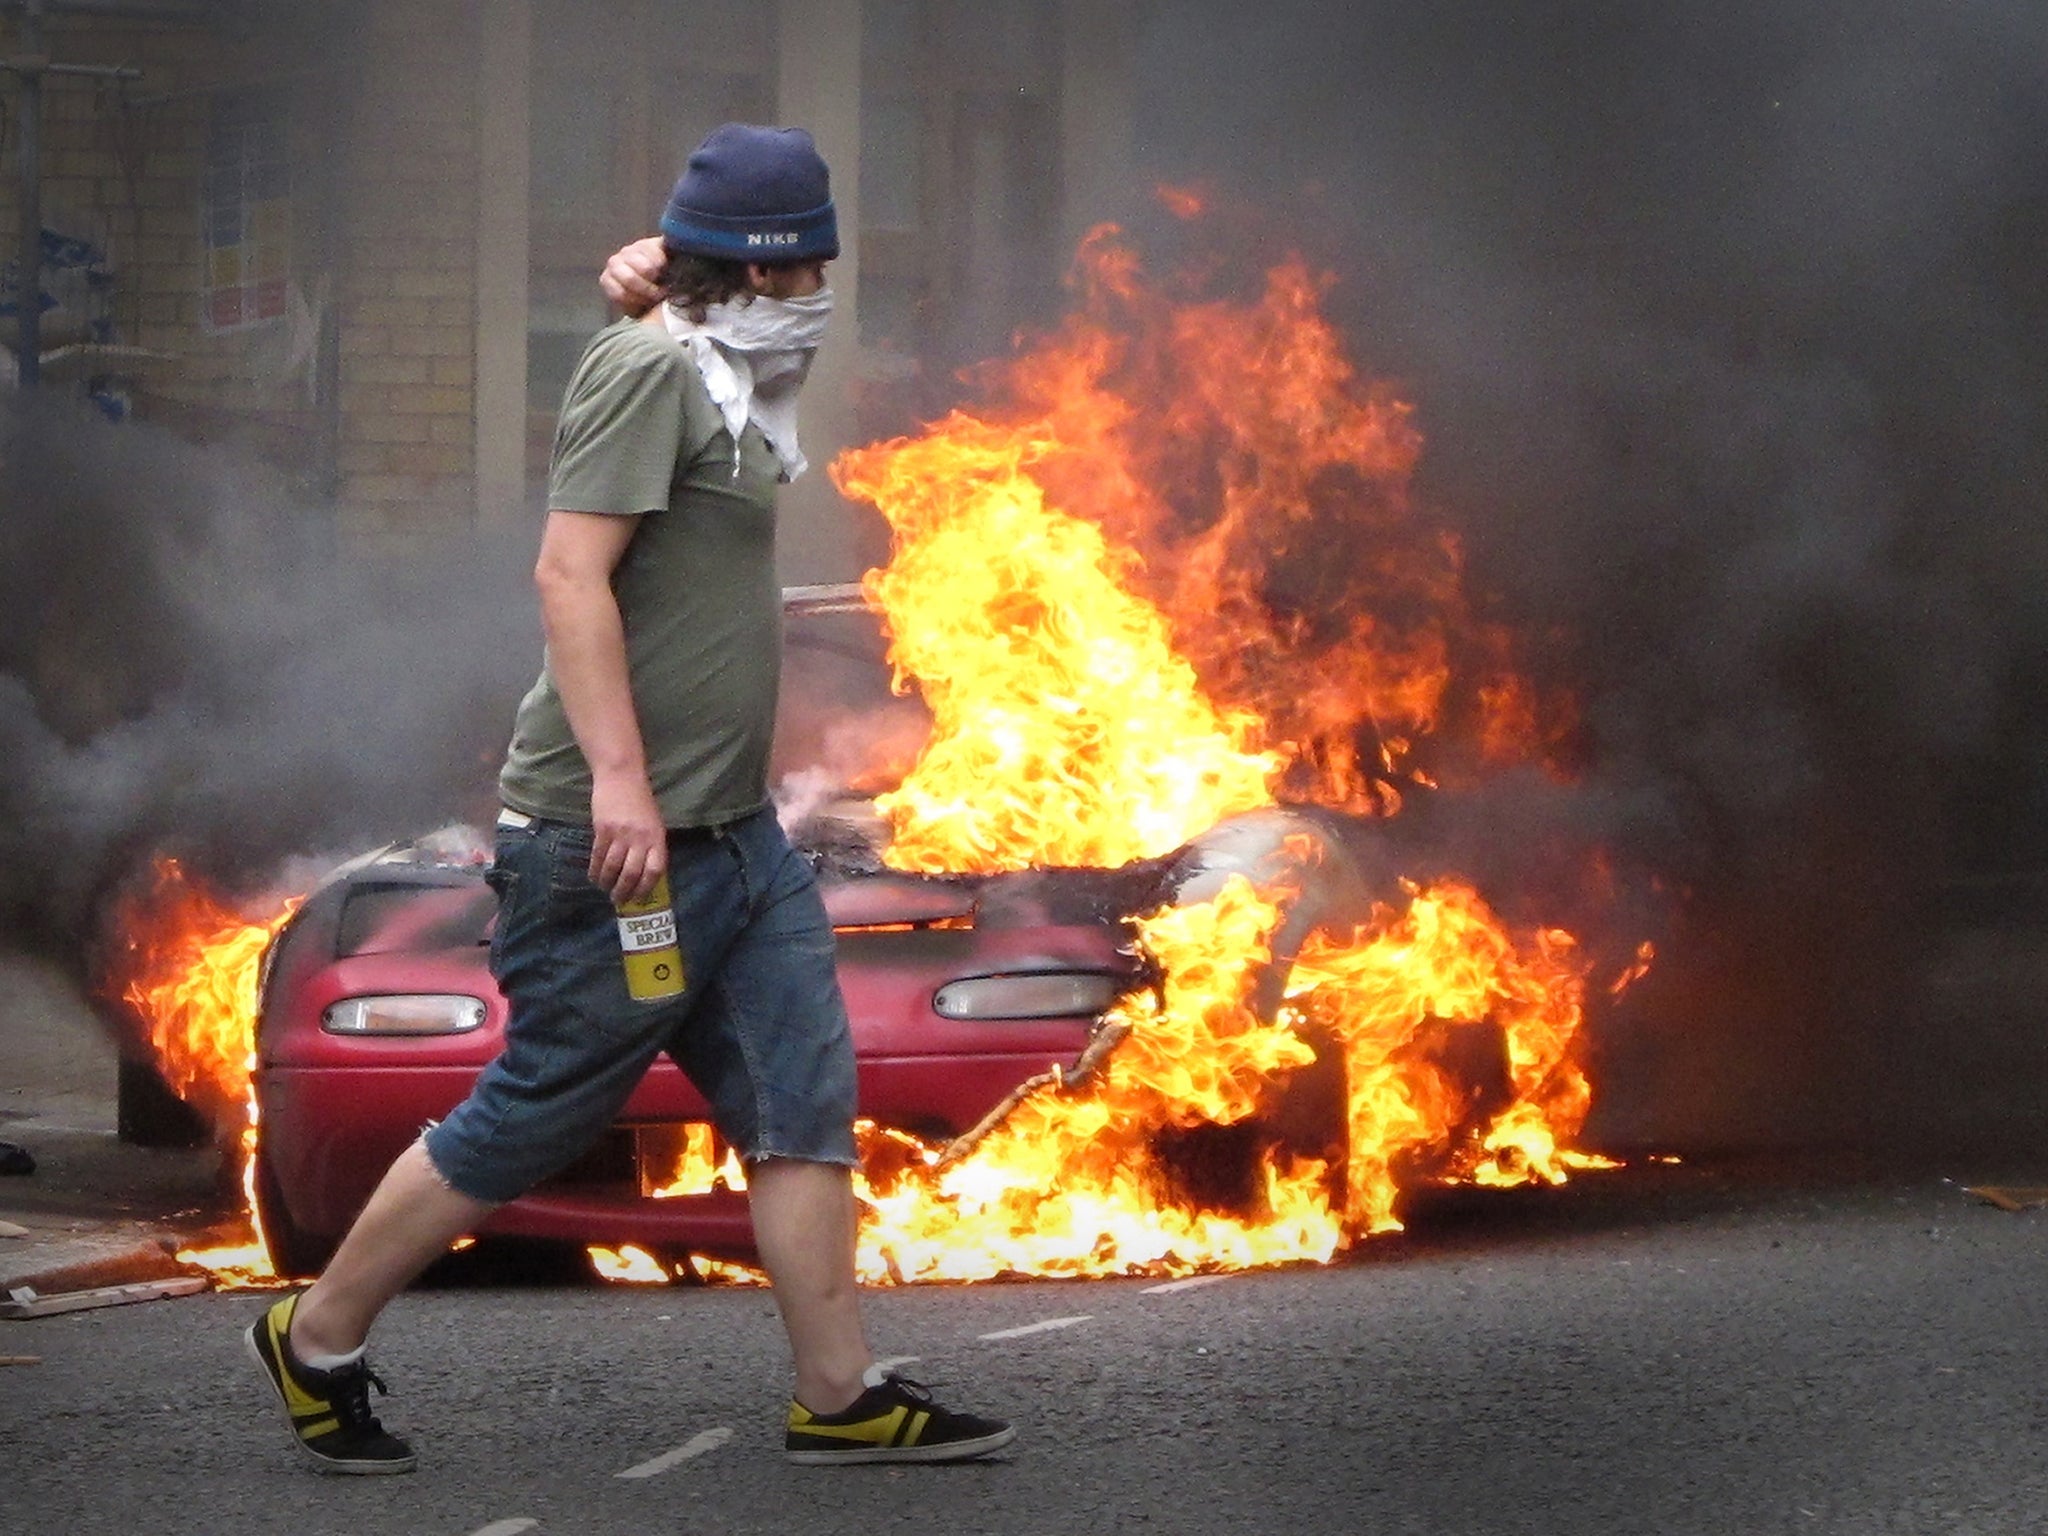 One of the defining images of the 2011 riots shows the carnage in Hackney, London